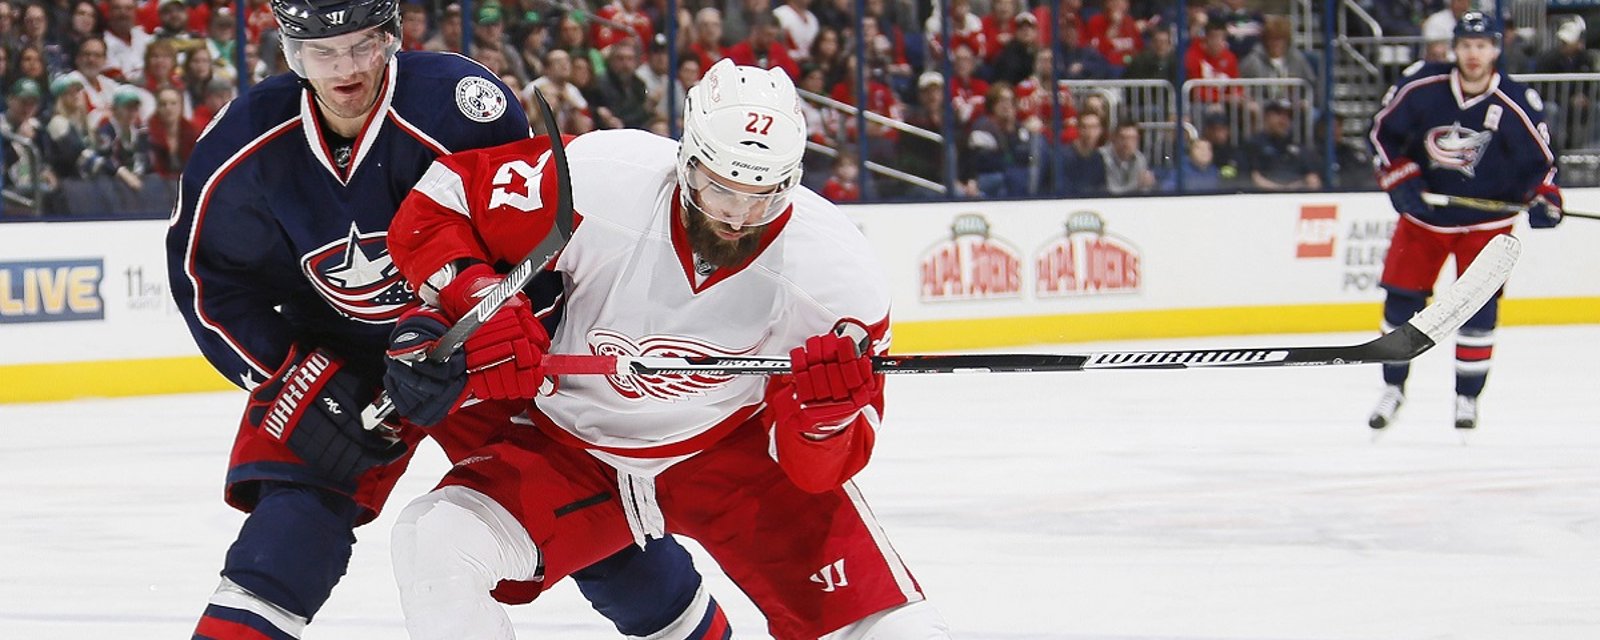 Breaking: After a long wait free agent Kyle Quincey signs a new deal with a new team.